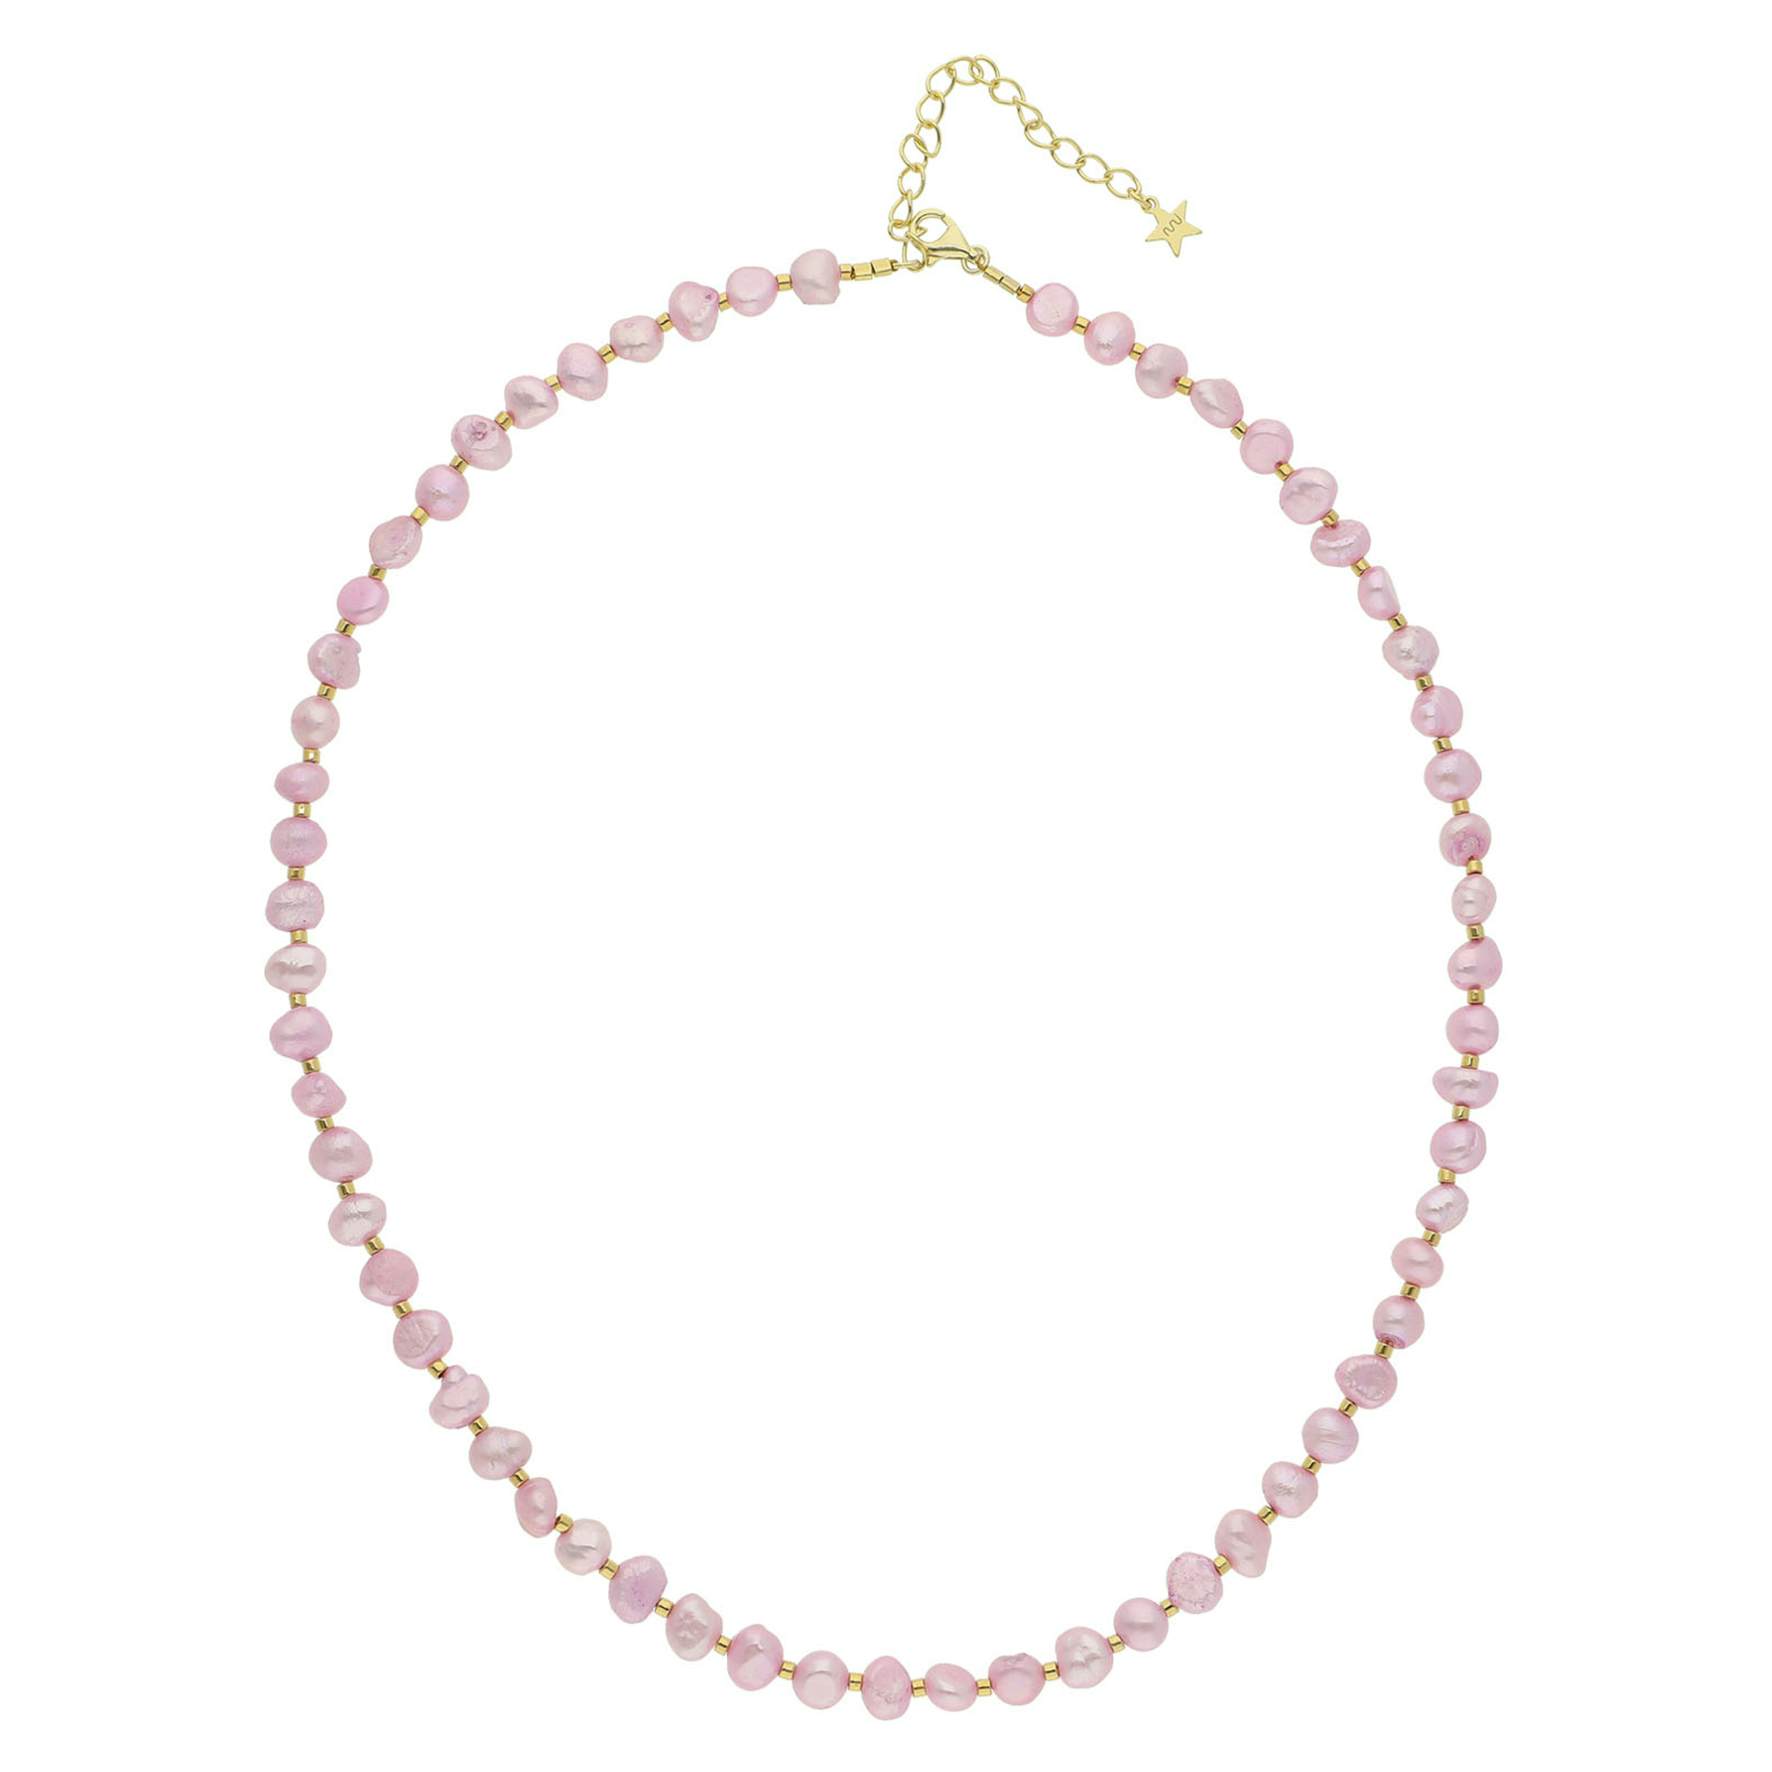 Ditte Light Pink Necklace from Nuni Copenhagen in Goldplated-Silver Sterling 925